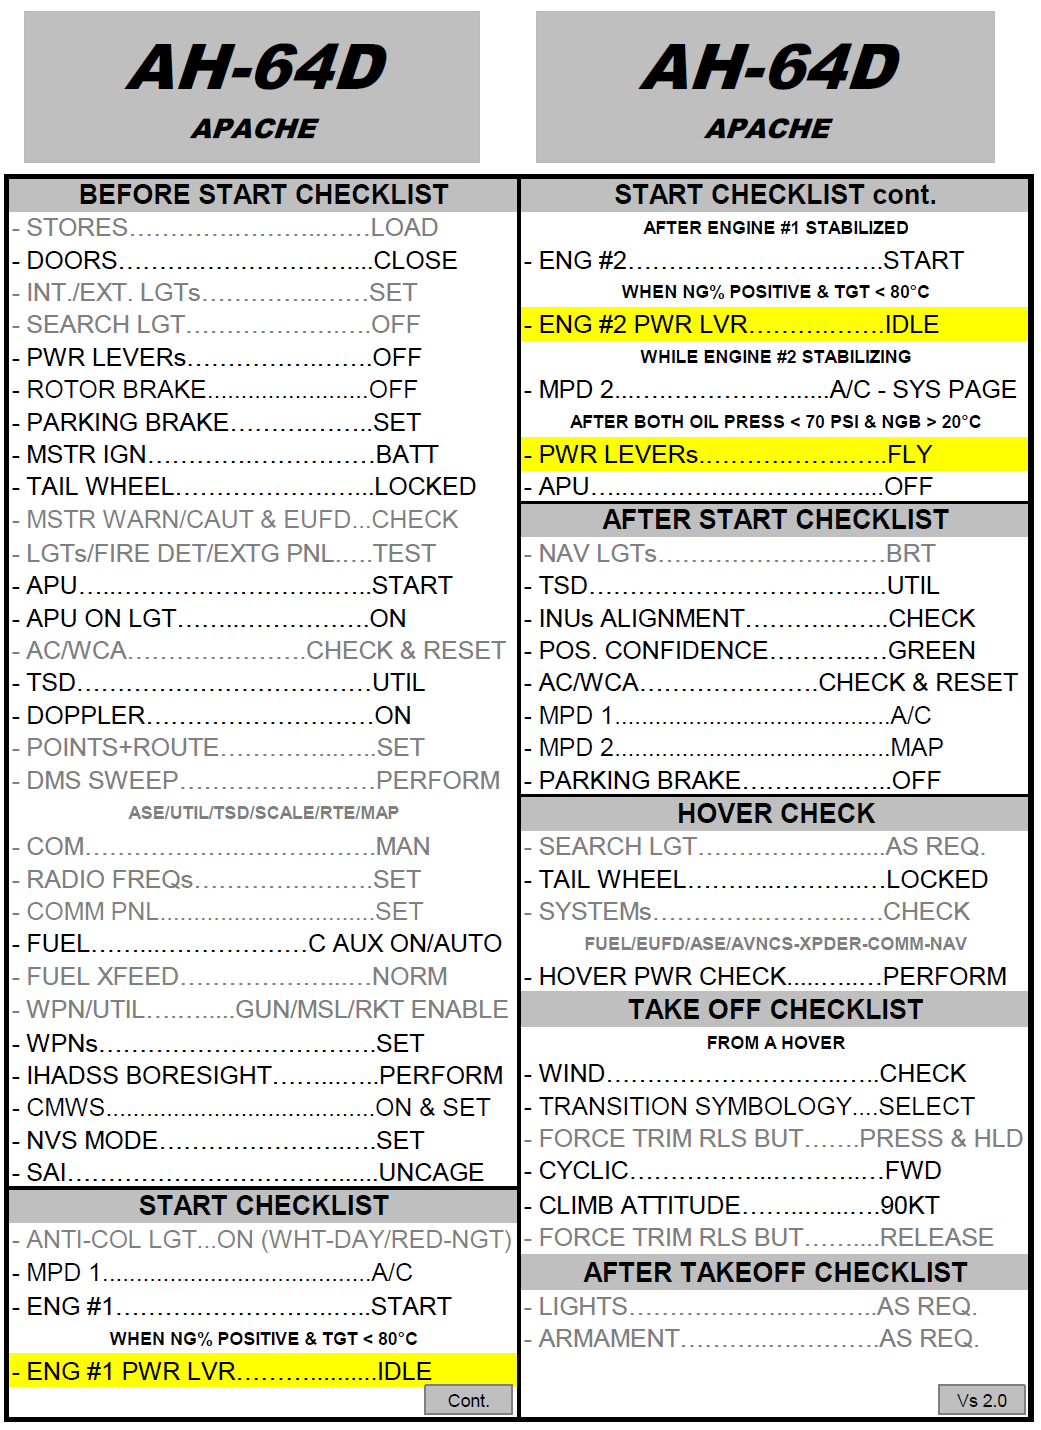 DCS AH-64D Quick Checklist Day and Night Ops (vs 2.0)